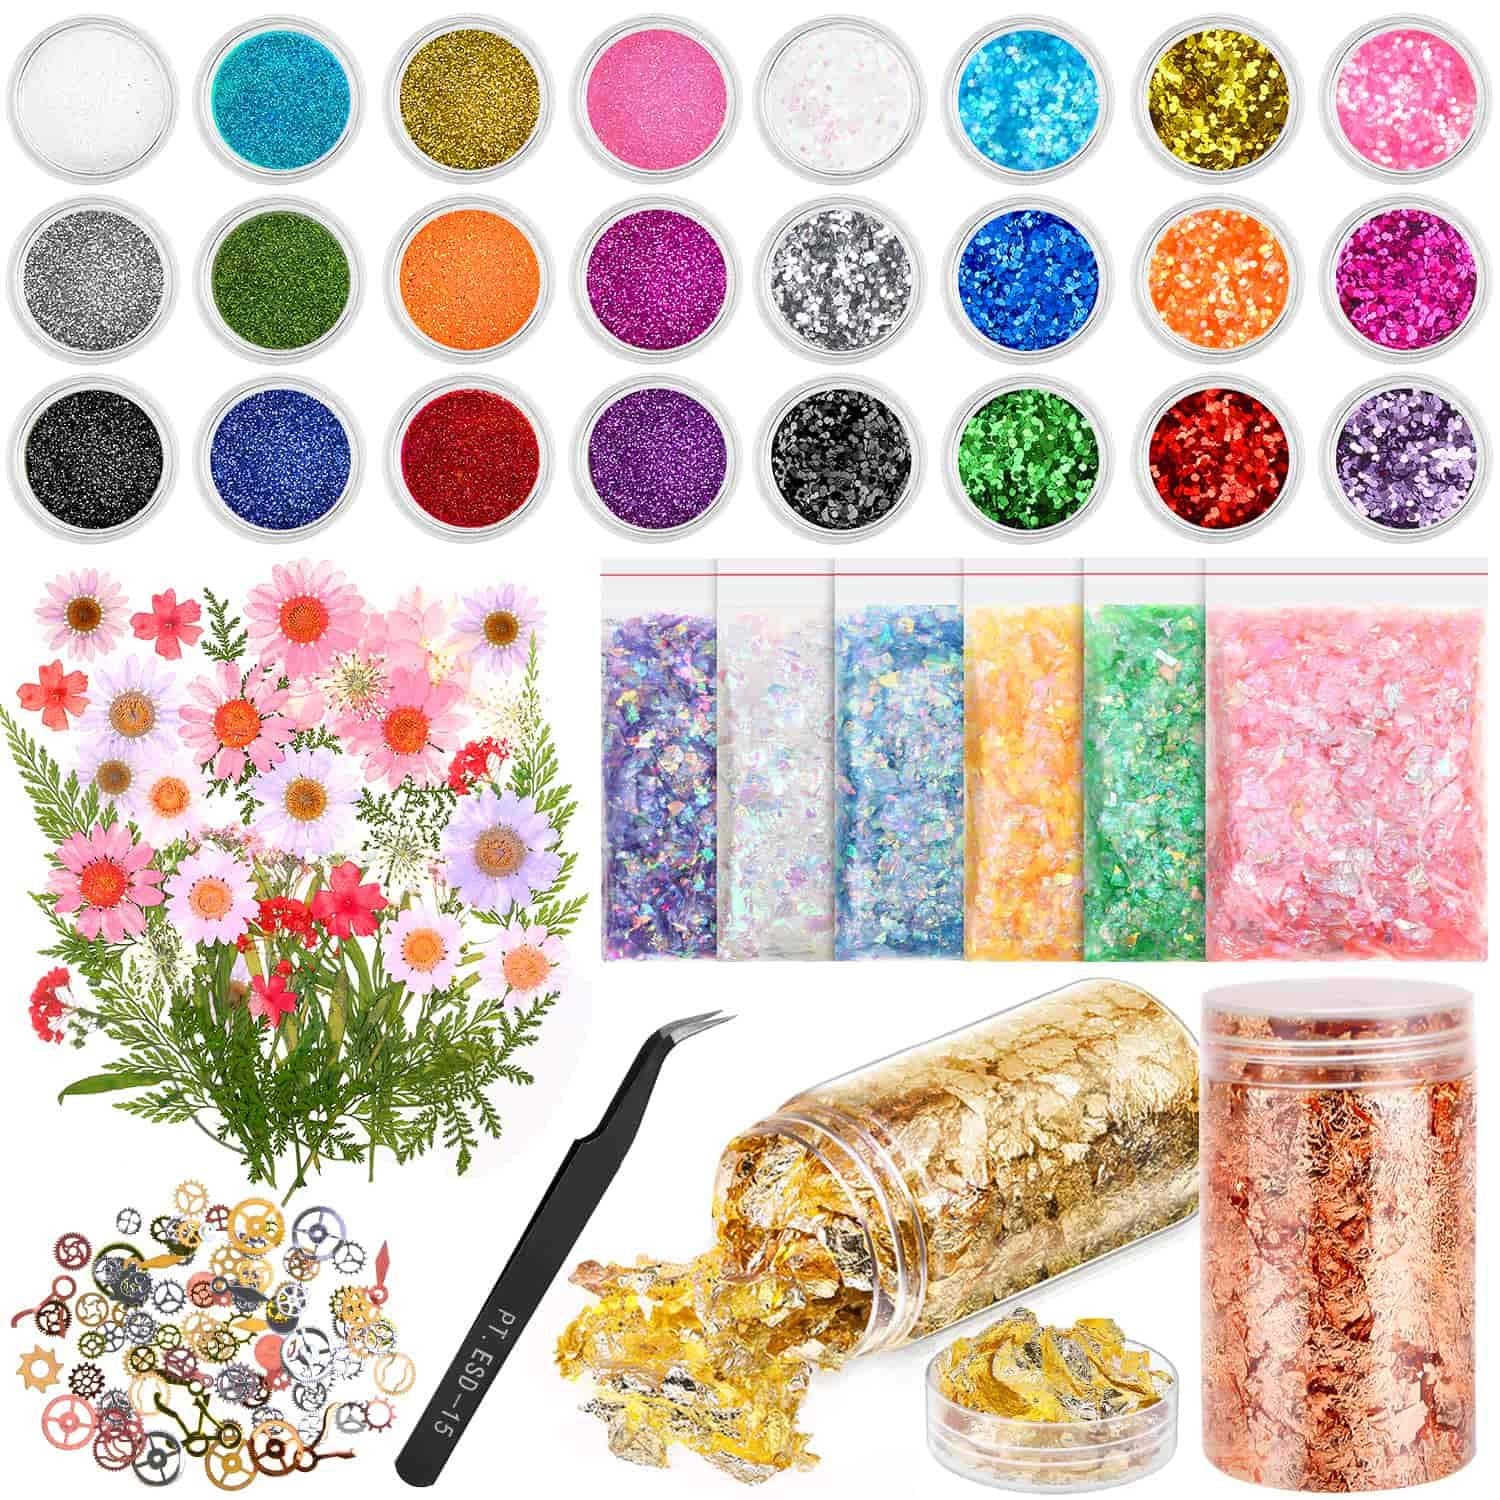 Resin Decoration Accessories Kit, Resin Jewelry Making Supplies Kit with  Dried Flowers, Resin Glitter, Gold Foil Flakes and Epoxy Resin Fillers for  Resin Crafts Lovers 